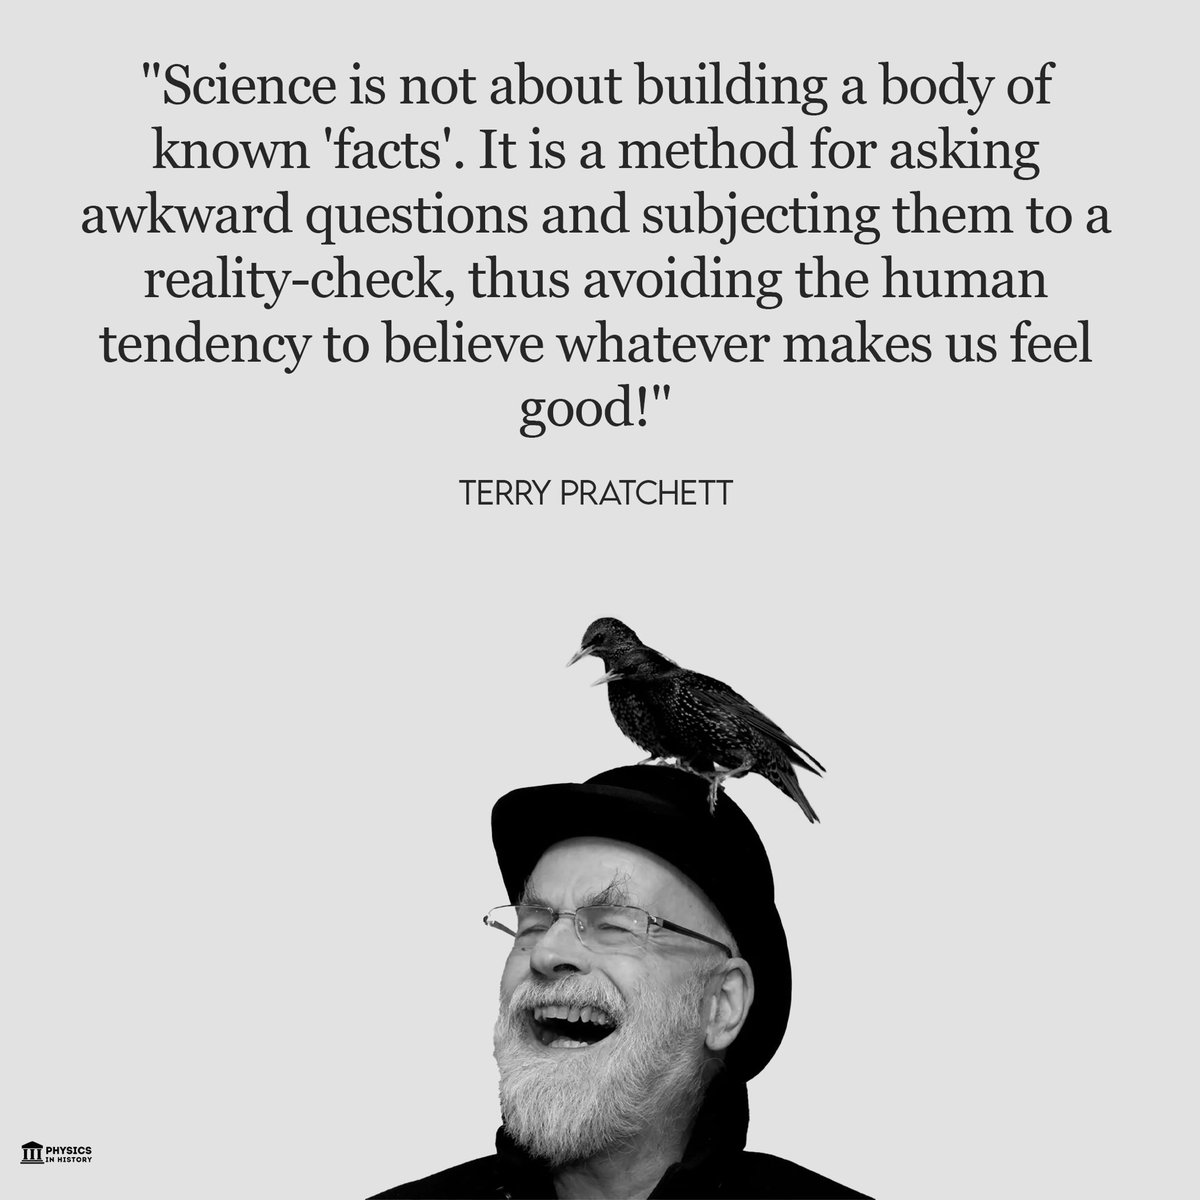 'Science is not about building a body of known 'facts'. It is a method for asking awkward questions and subjecting them to a reality-check, thus avoiding the human tendency to believe whatever makes us feel good!' -- Terry Pratchett